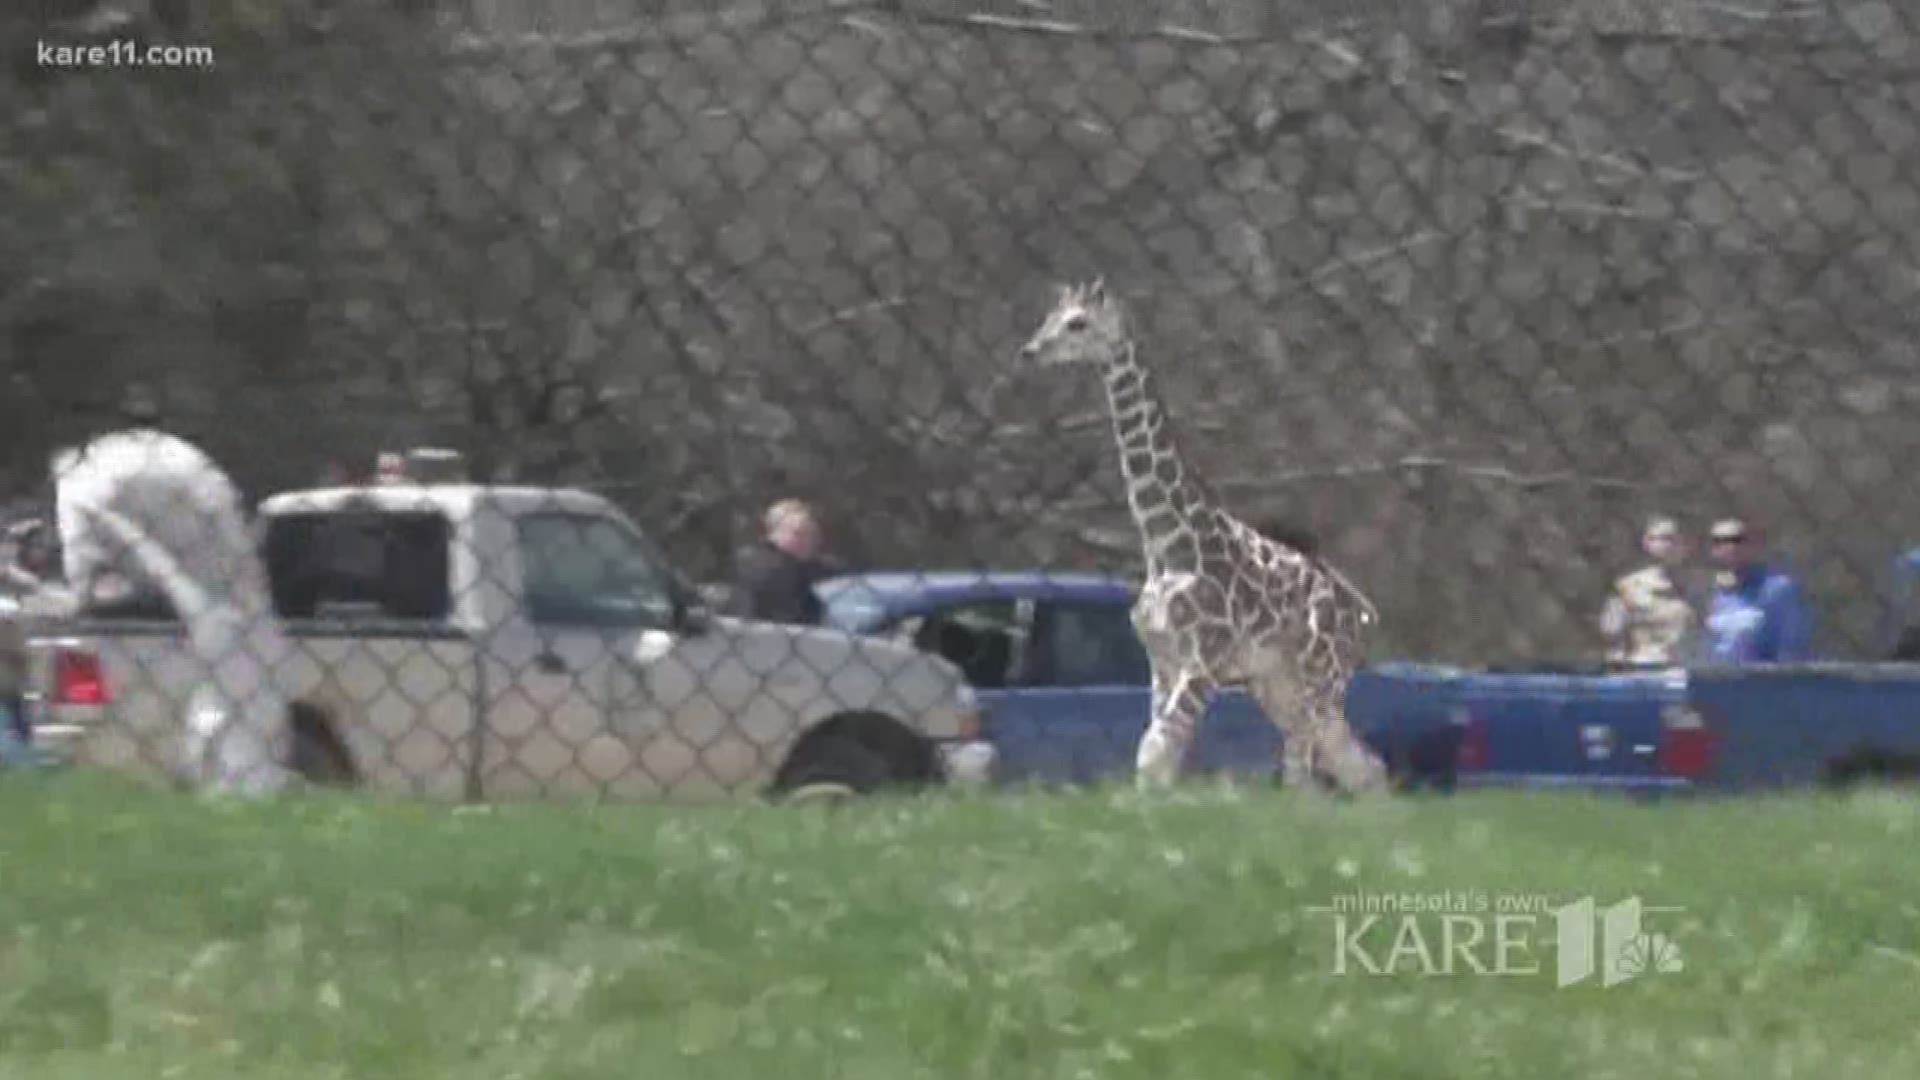 A giraffe escaped from an Indiana zoo and was on the loose for two hours in the zoo's parking lot. Crazy!